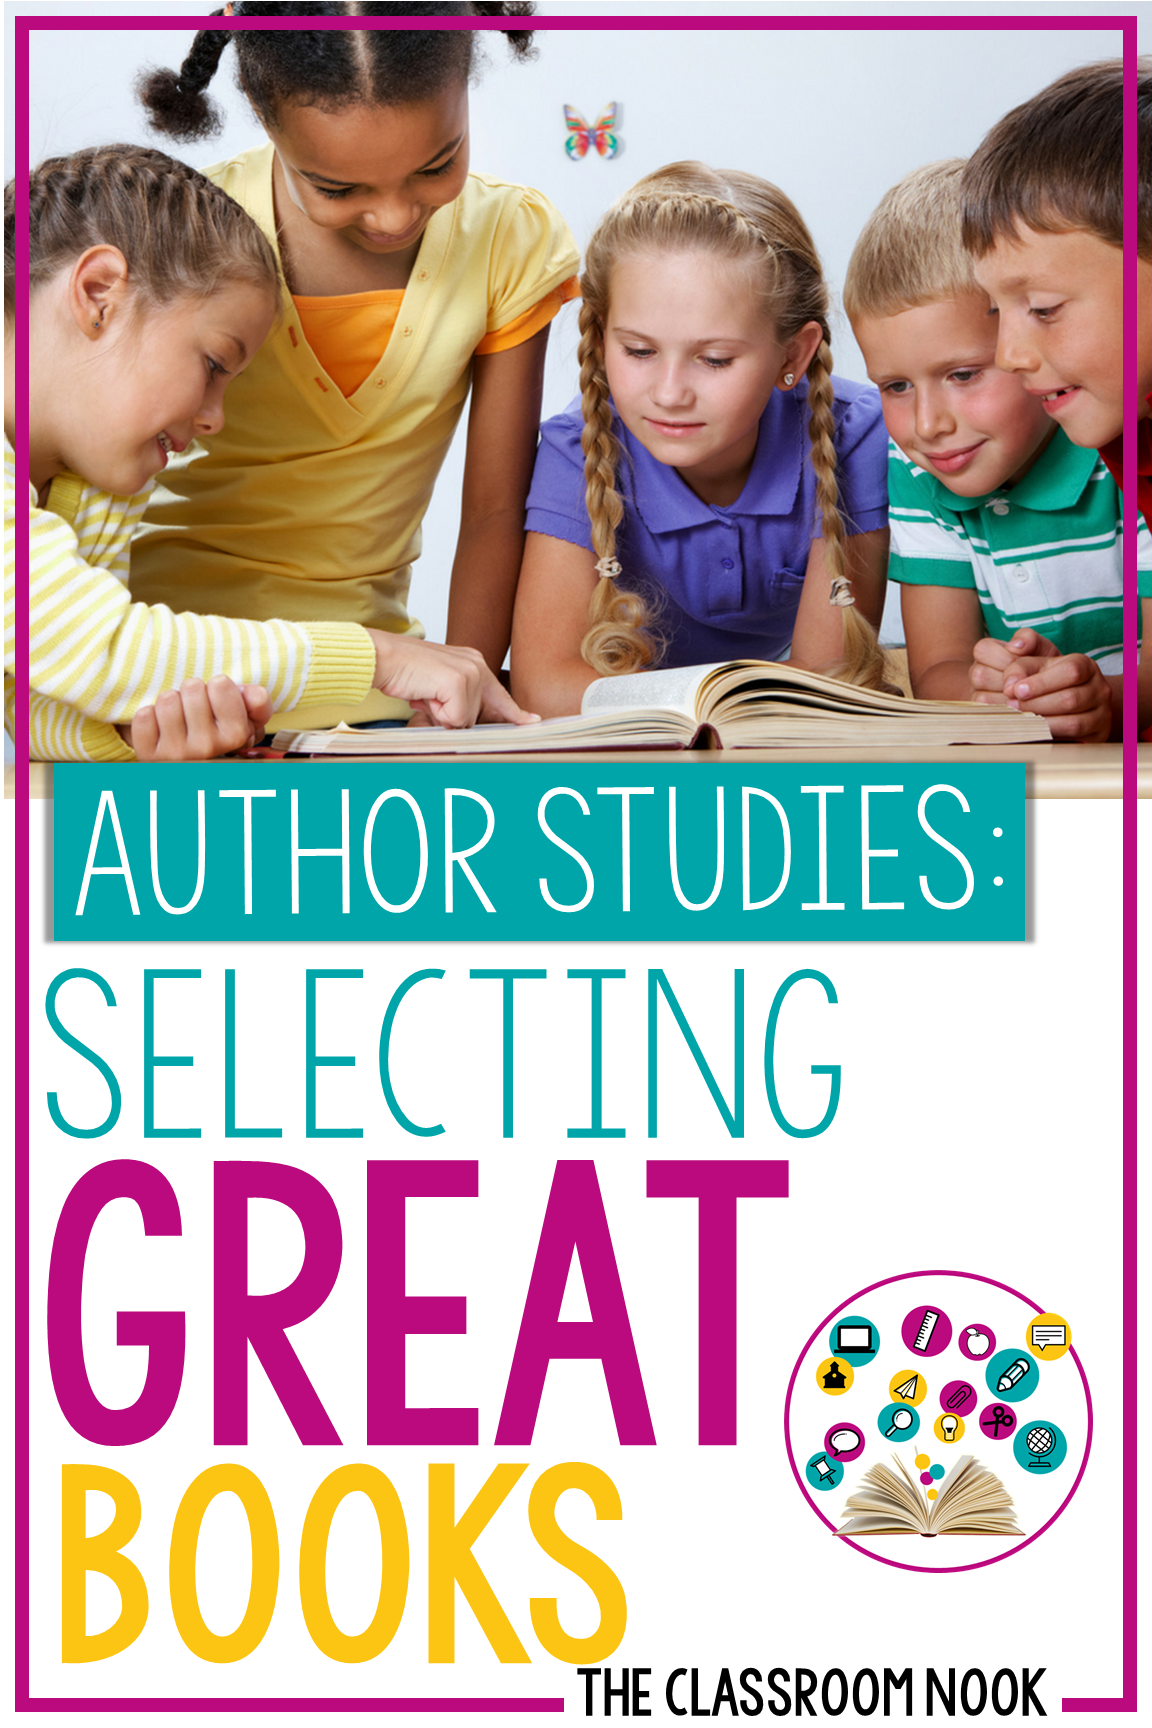 Author Study Series:  Book Selection